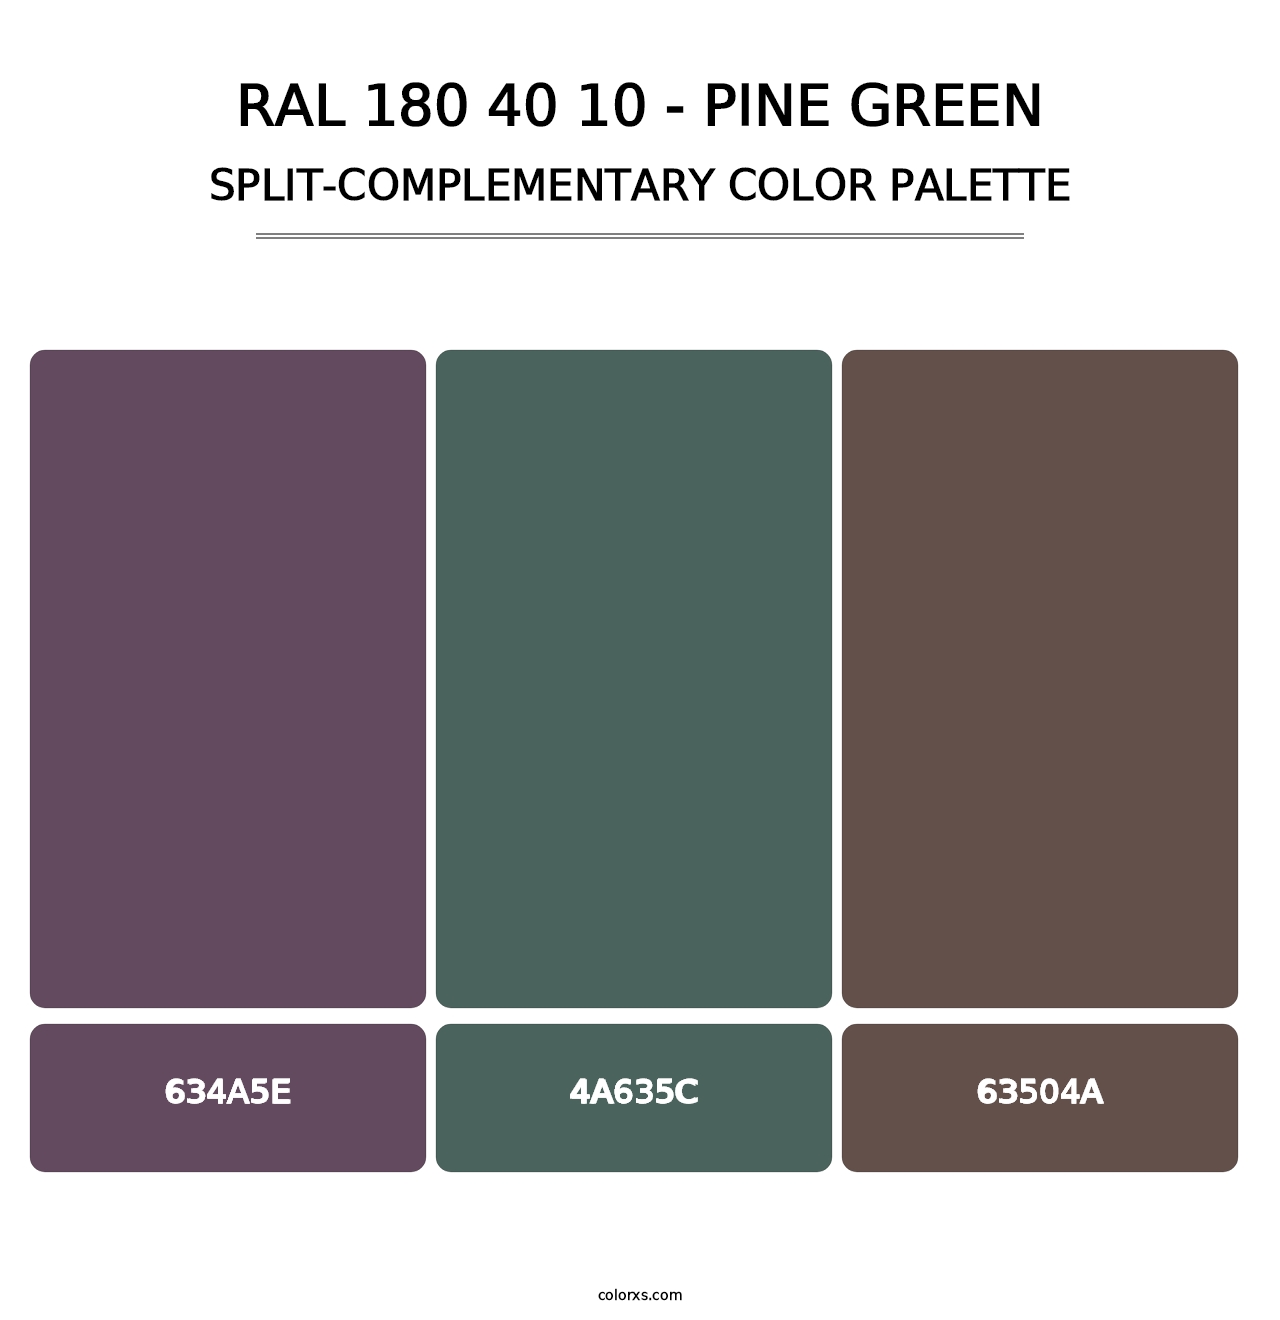 RAL 180 40 10 - Pine Green - Split-Complementary Color Palette